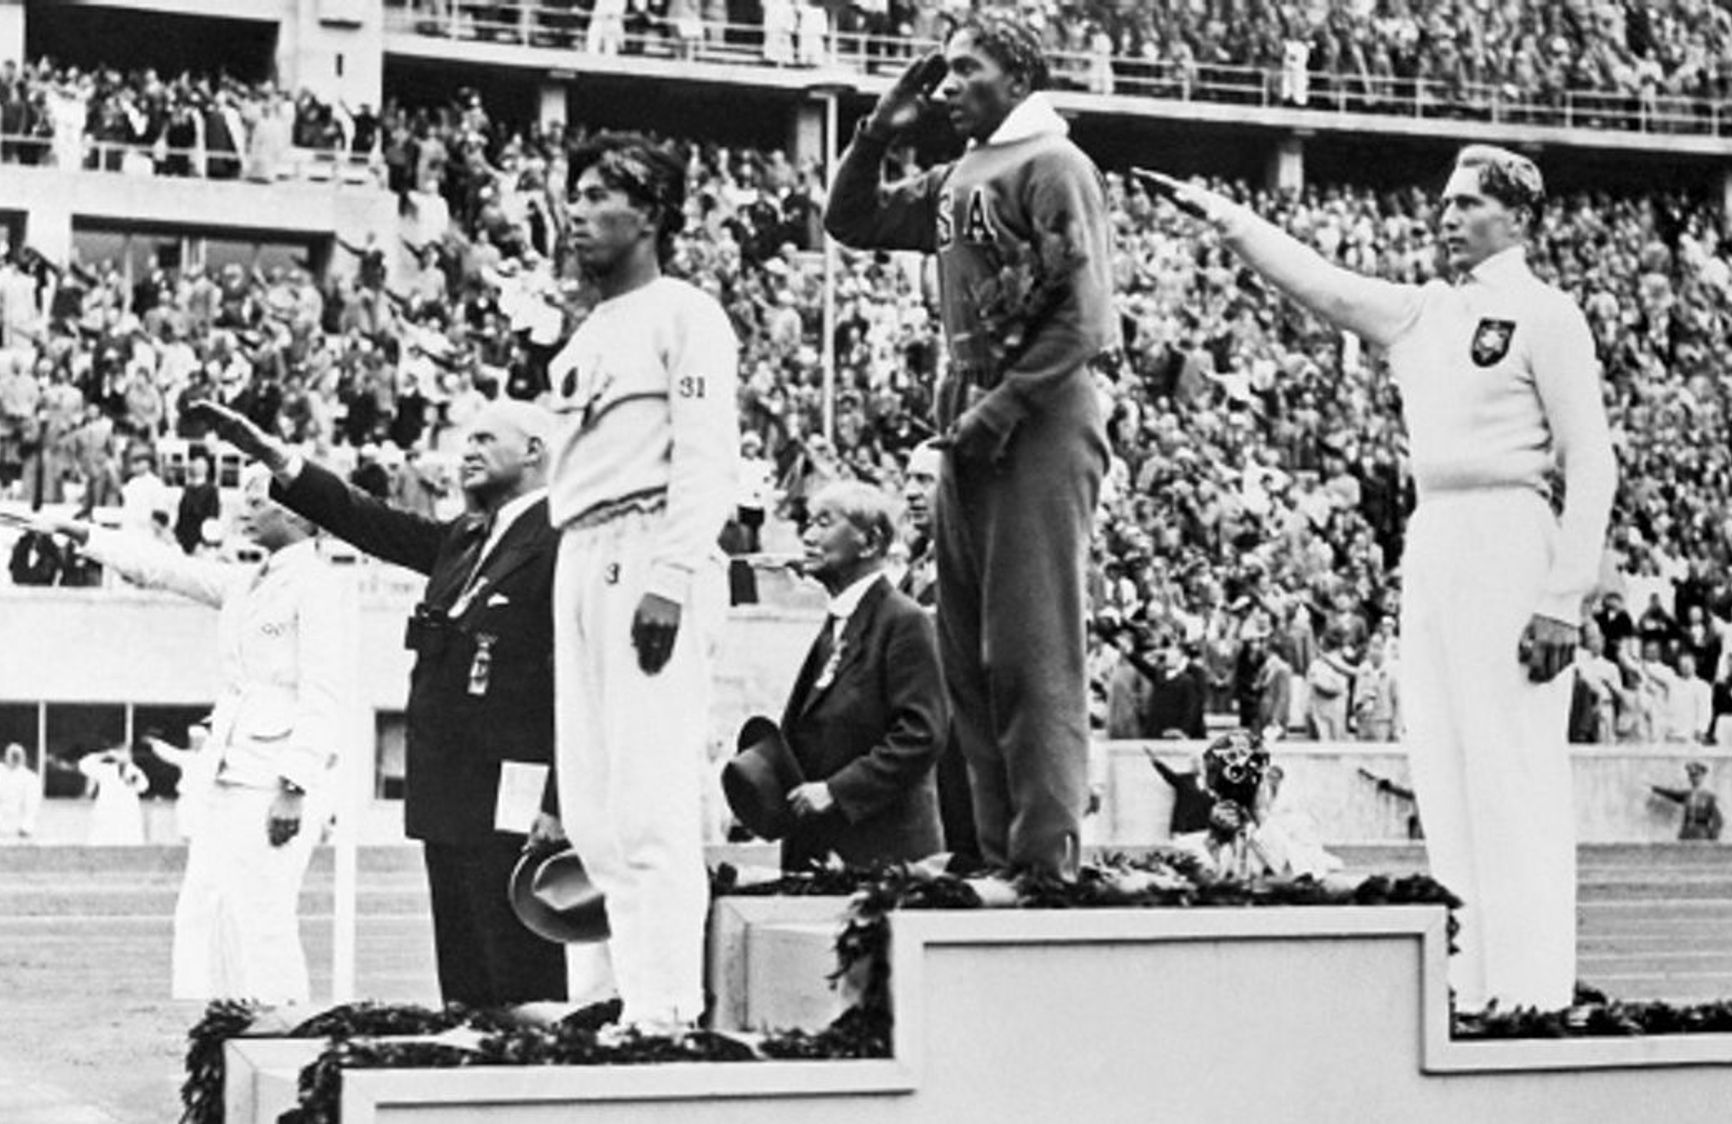 Athletes at the Berlin Olympics doing the Nazi salute 